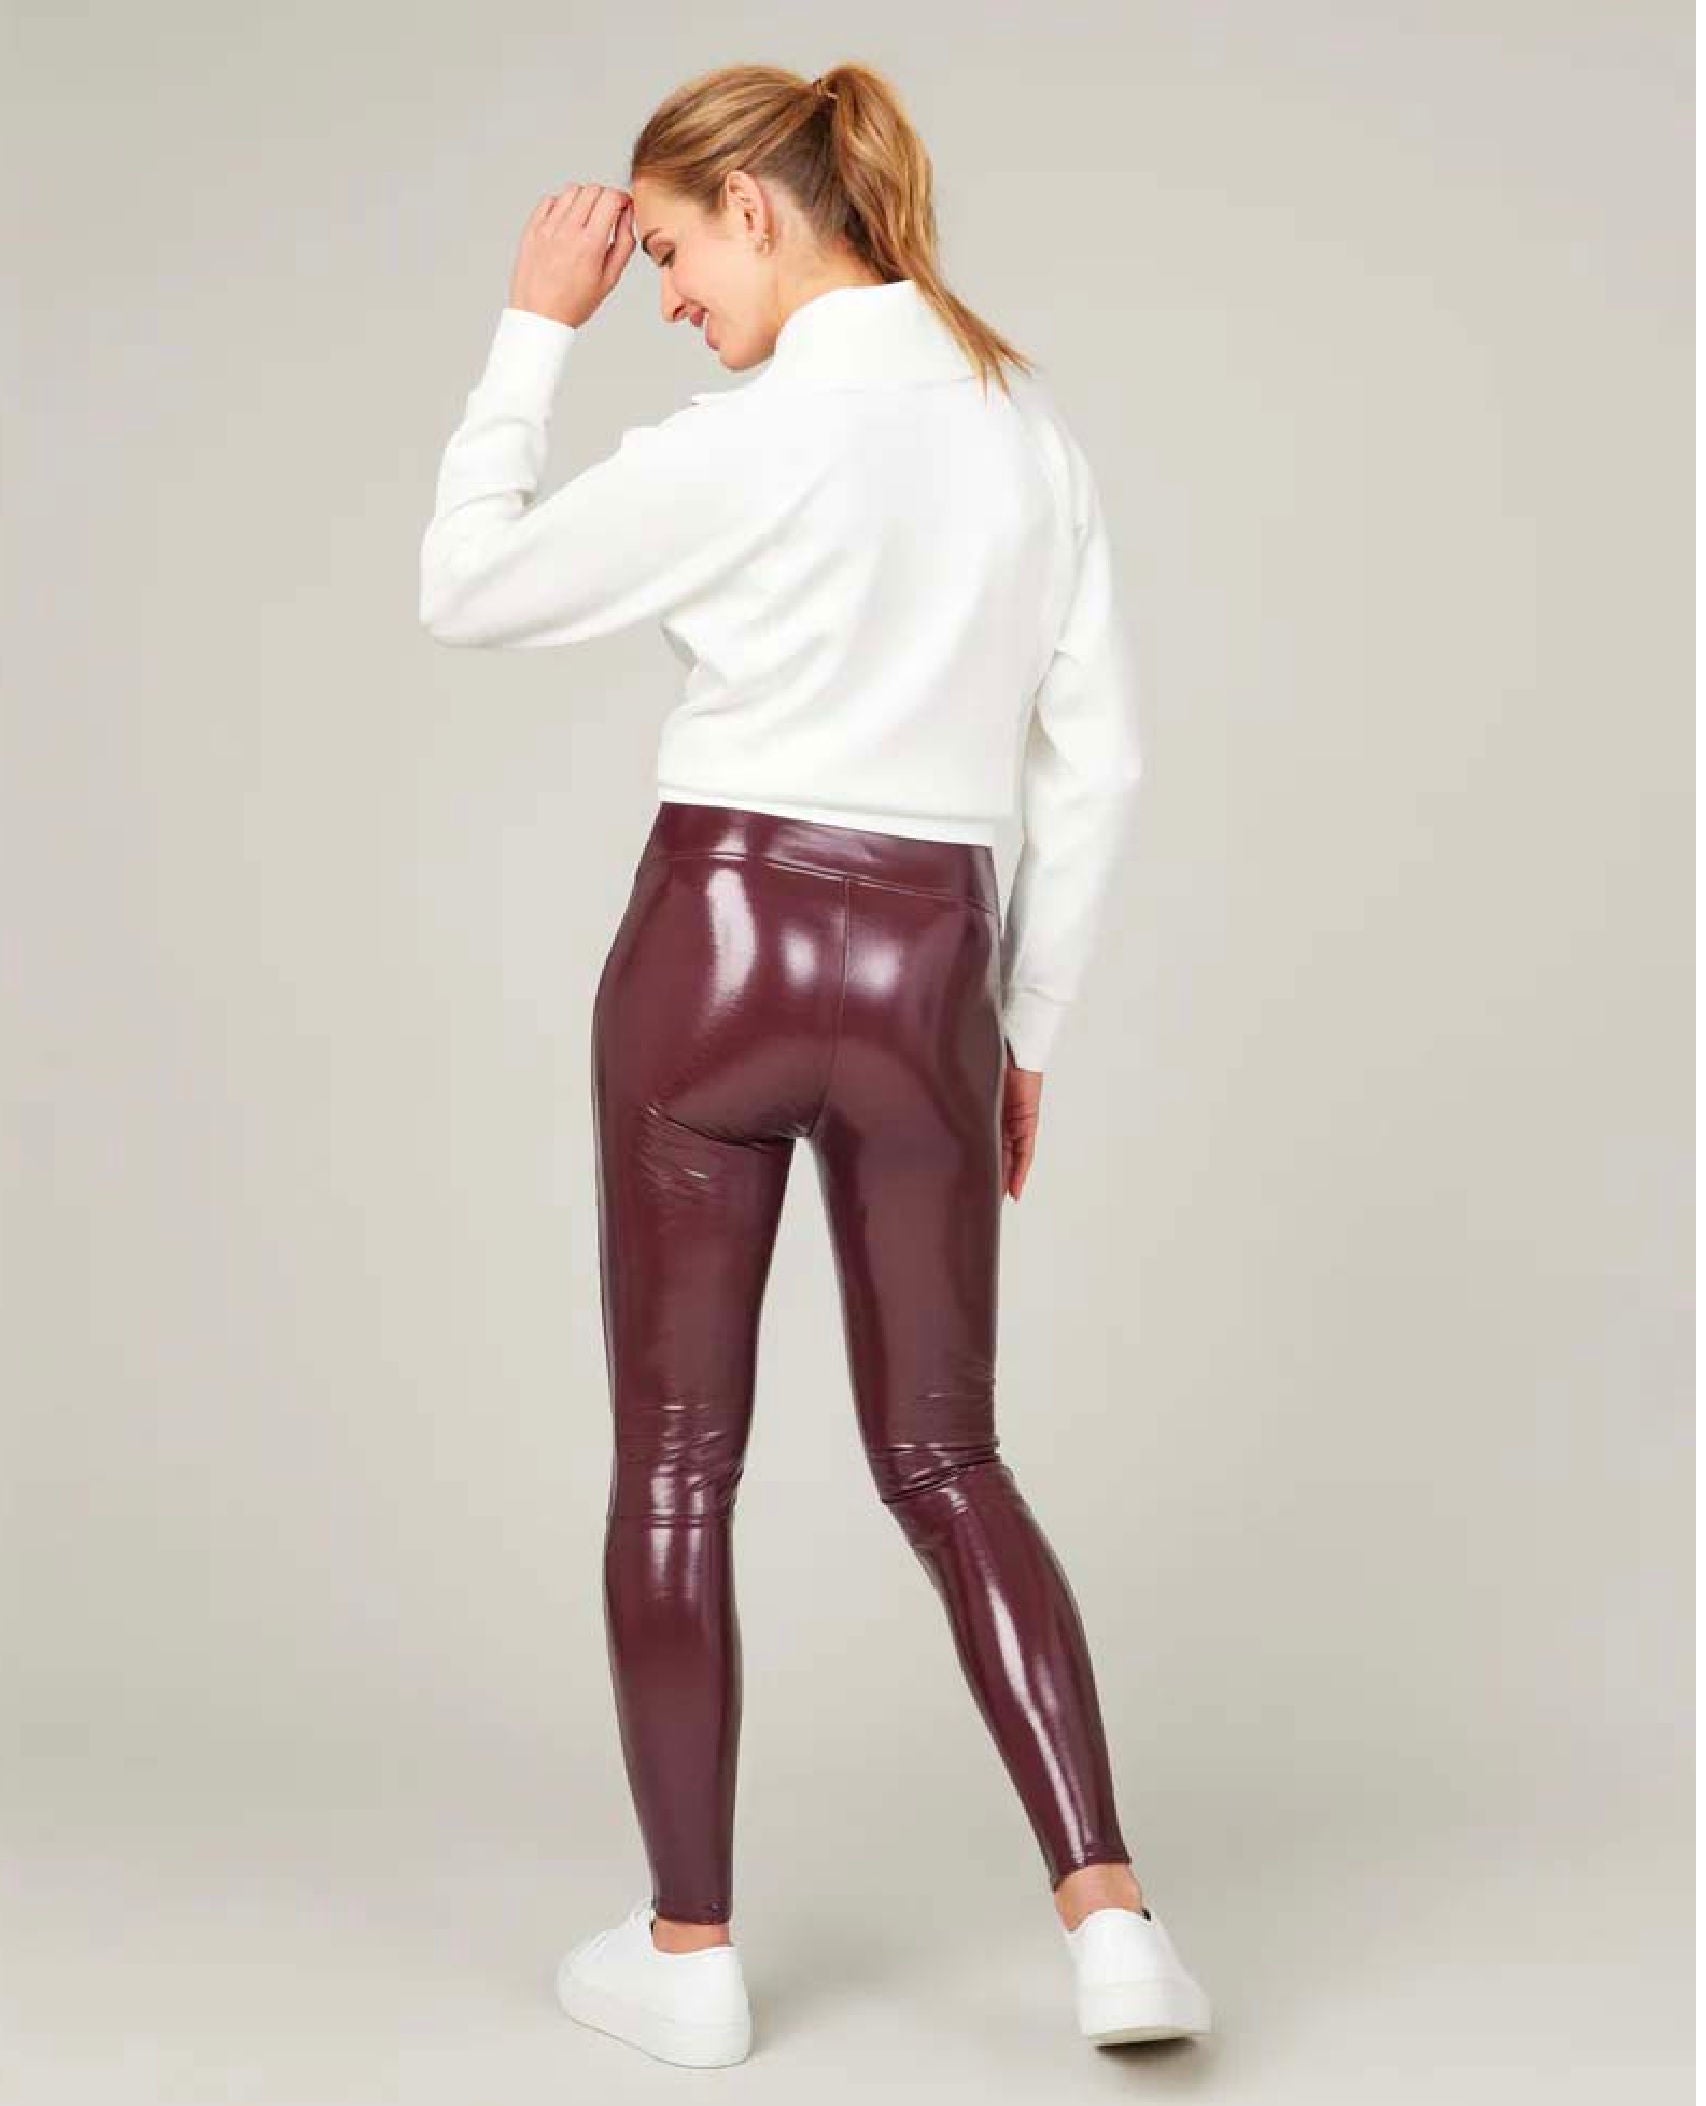 SPANX Women's Ruby Patent Slim Fit Faux Leather Casual Leggings Pants Red  New